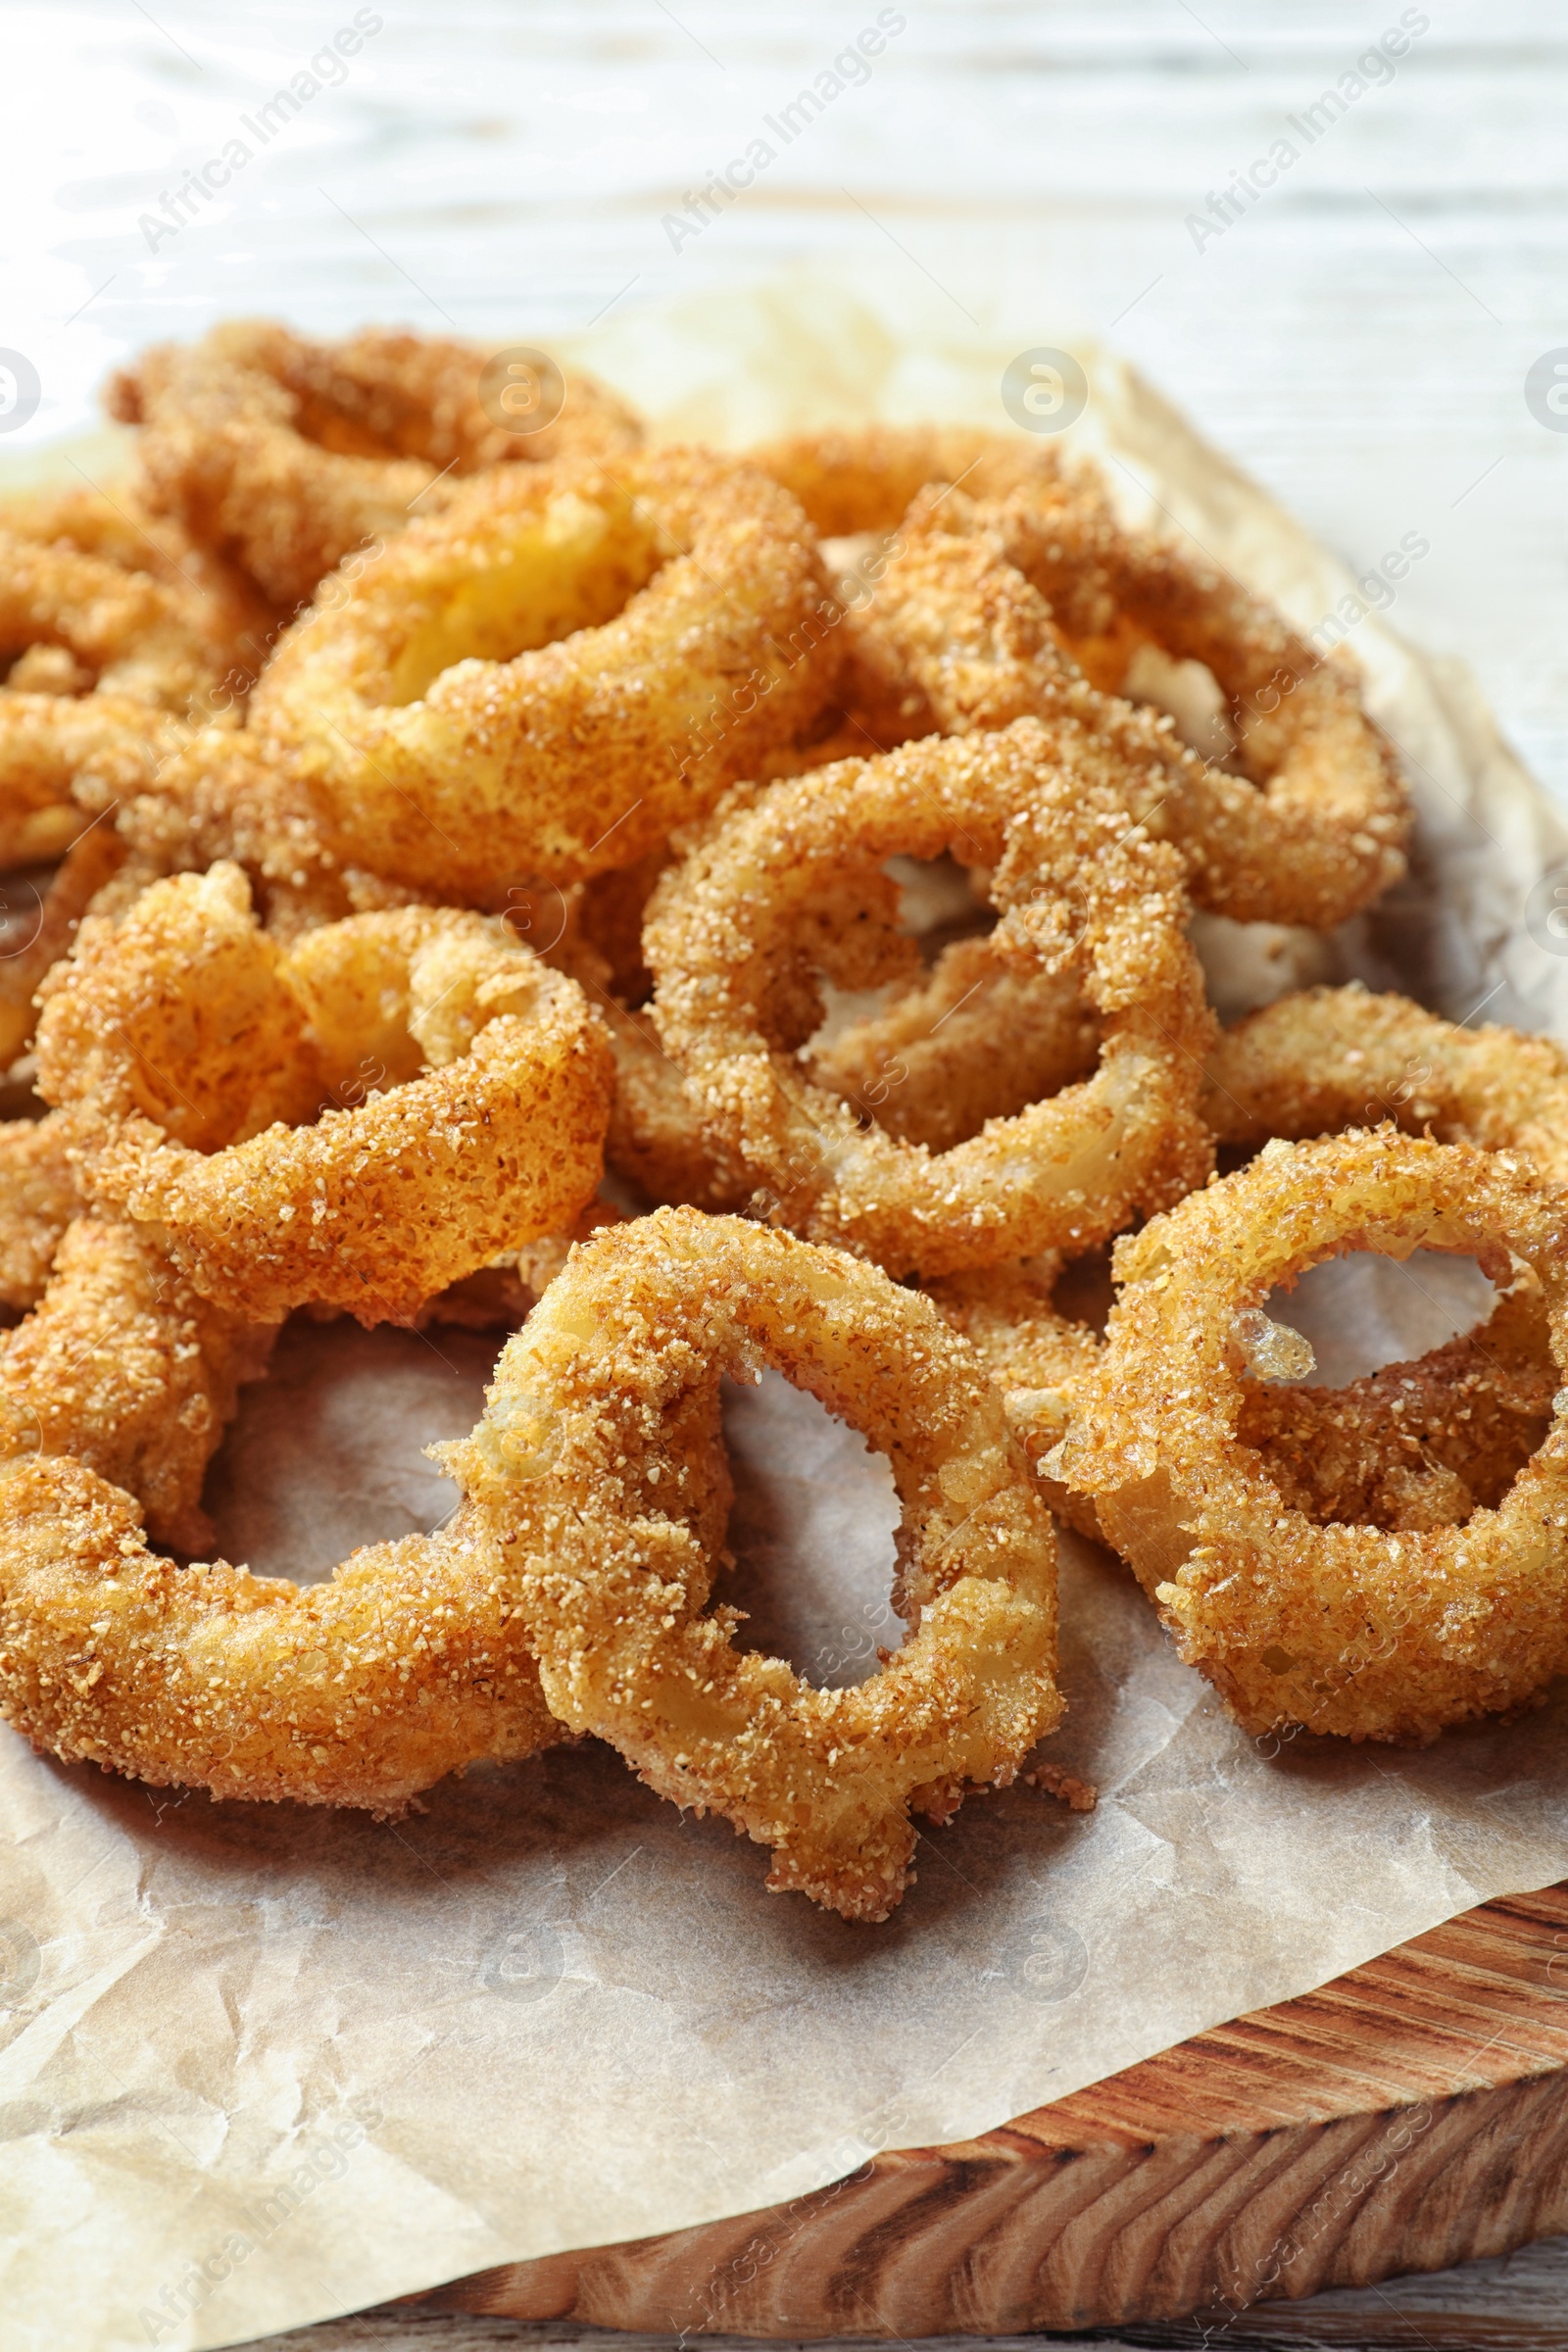 Photo of Homemade crunchy fried onion rings on wooden board, closeup